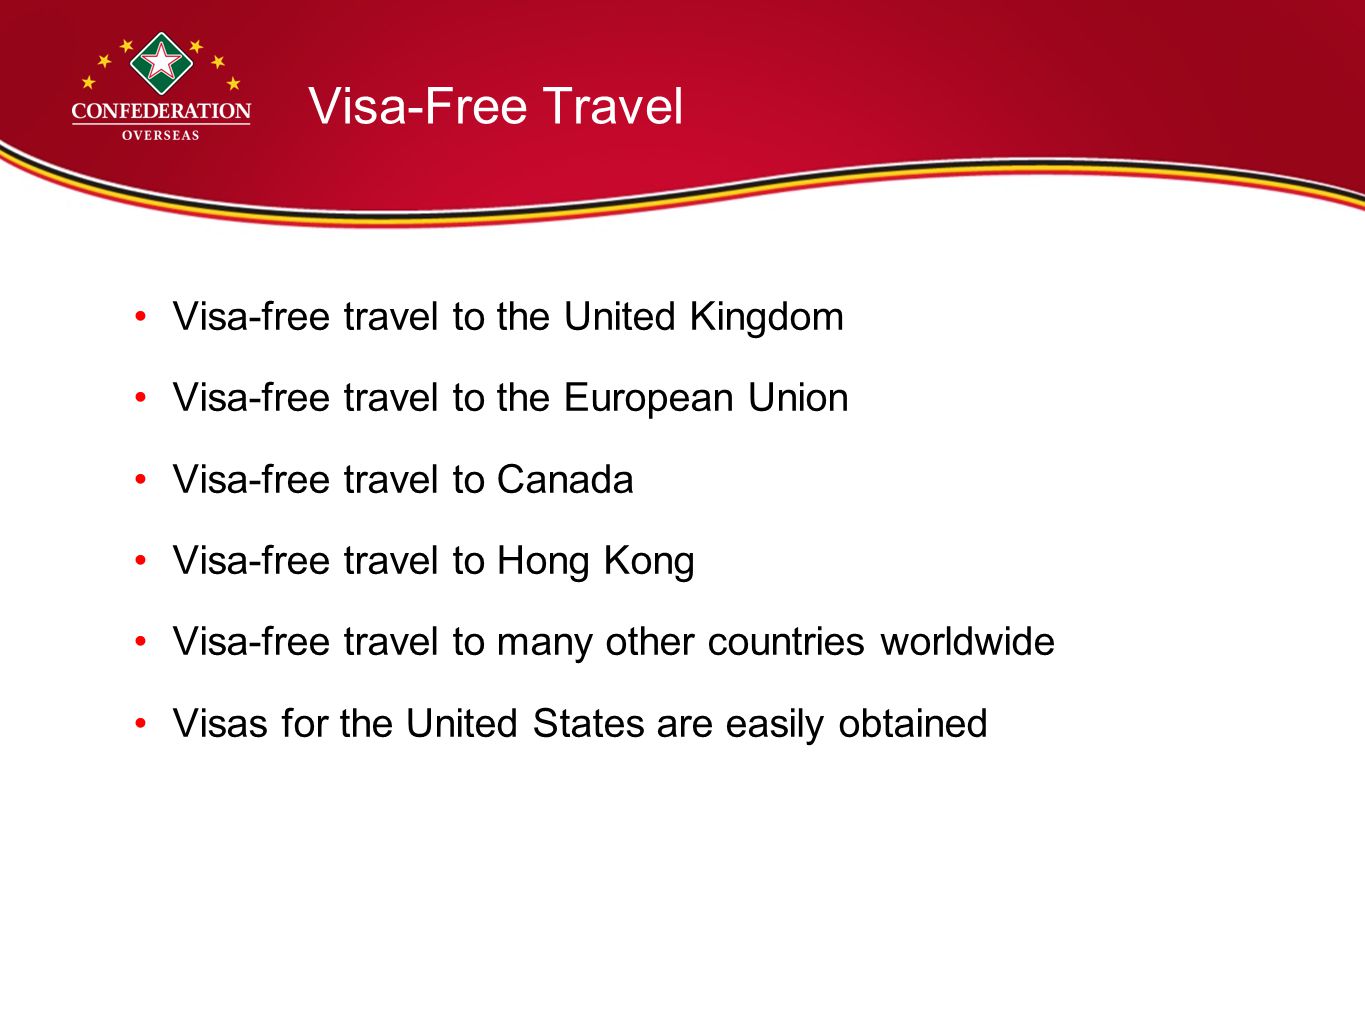 Visa-Free Travel Visa-free travel to the United Kingdom Visa-free travel to the European Union Visa-free travel to Canada Visa-free travel to Hong Kong Visa-free travel to many other countries worldwide Visas for the United States are easily obtained